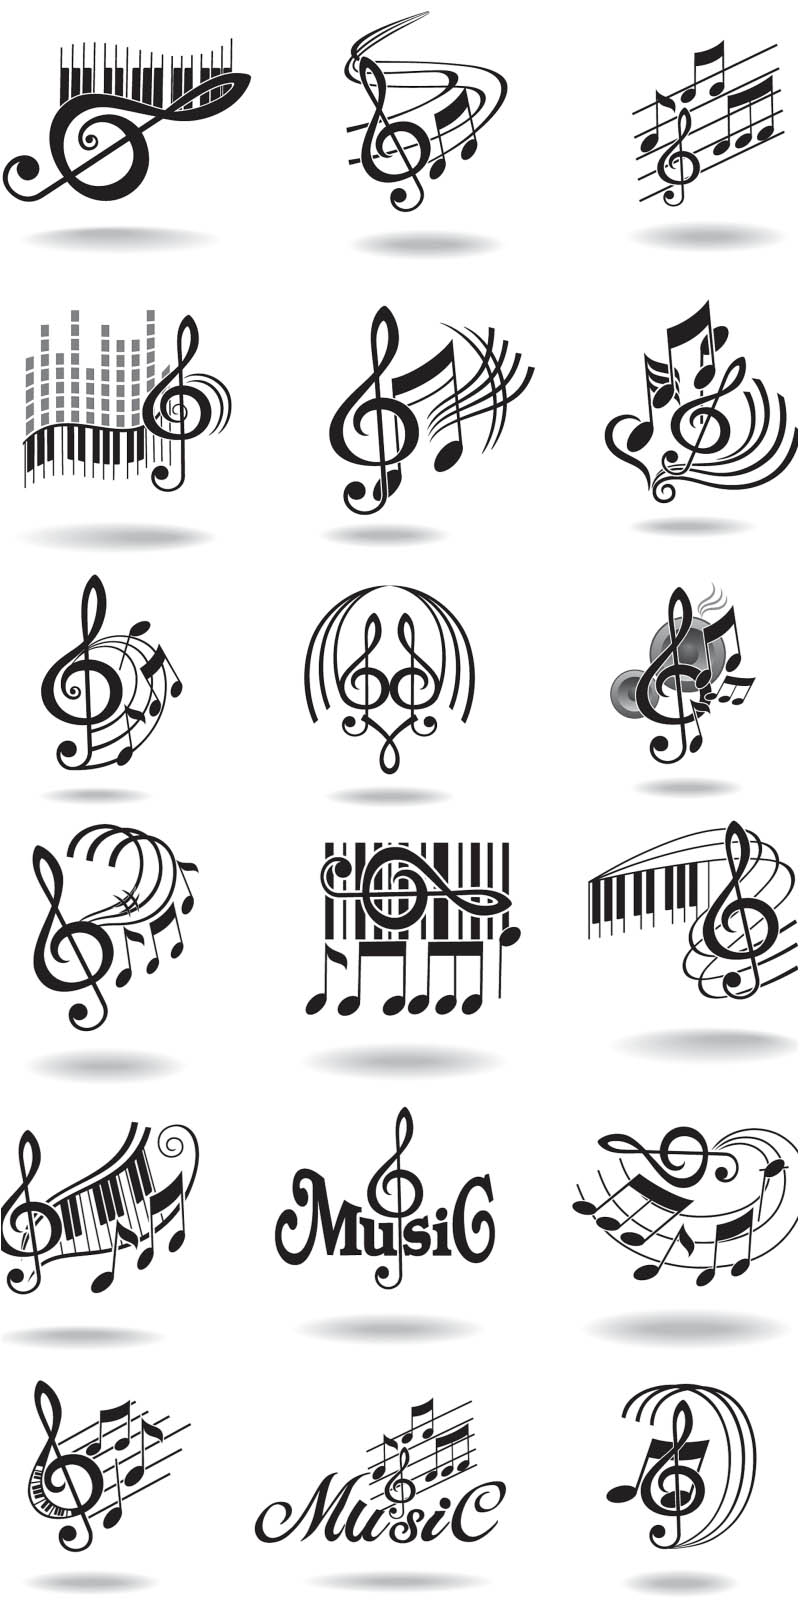 11 Music Staff Vector Images